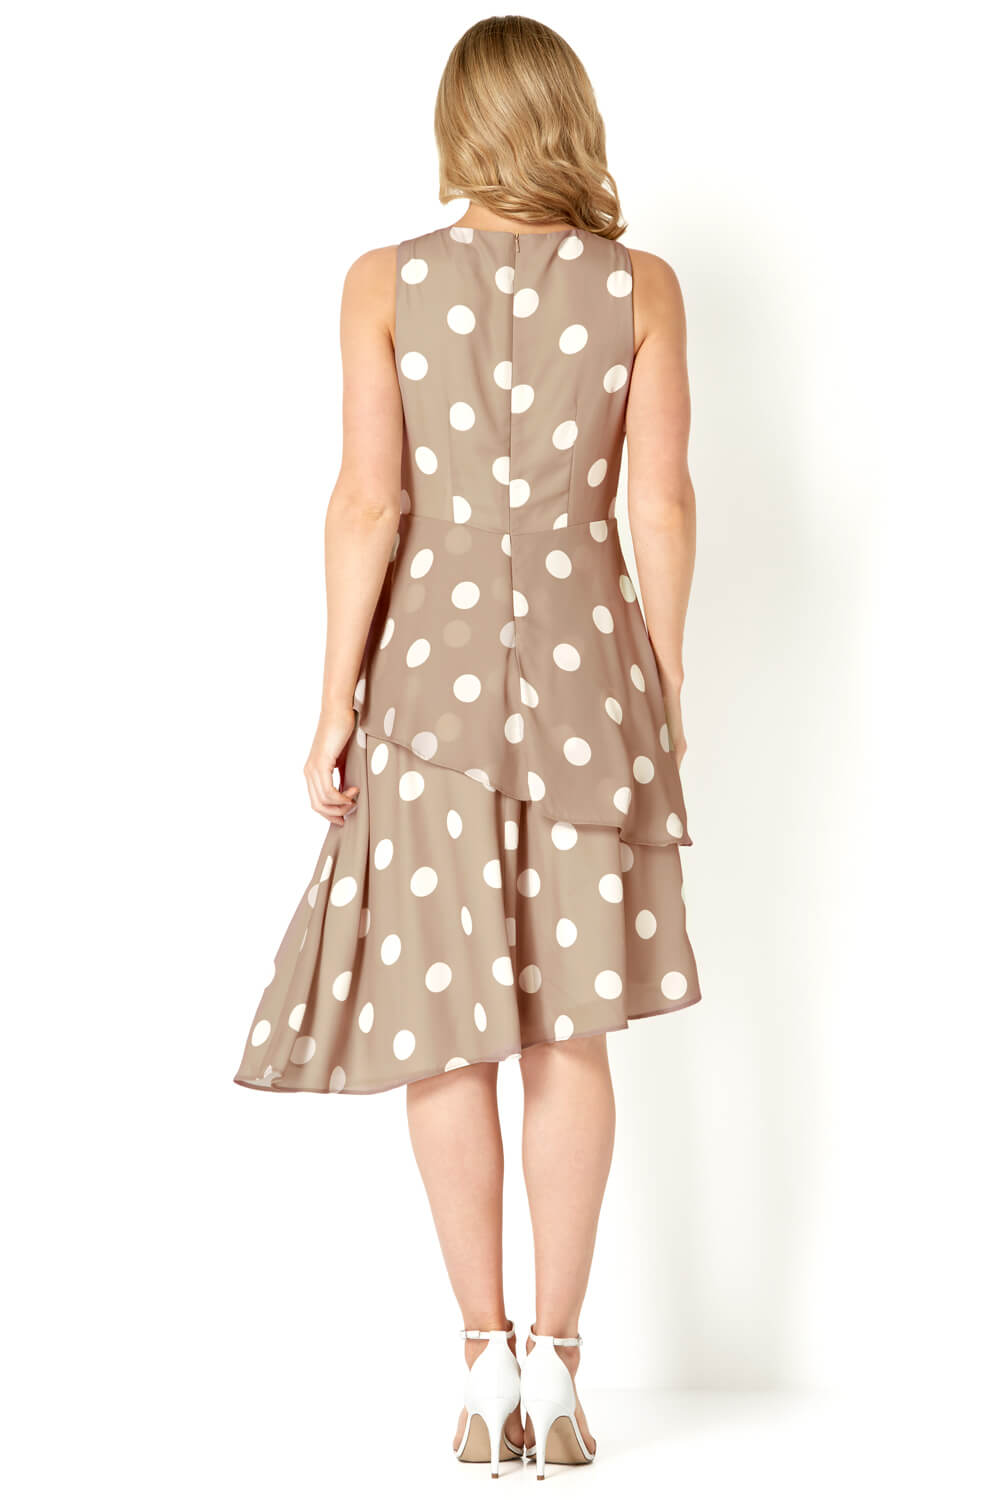 Mink Spot Print Fit and Flare Dress, Image 2 of 3